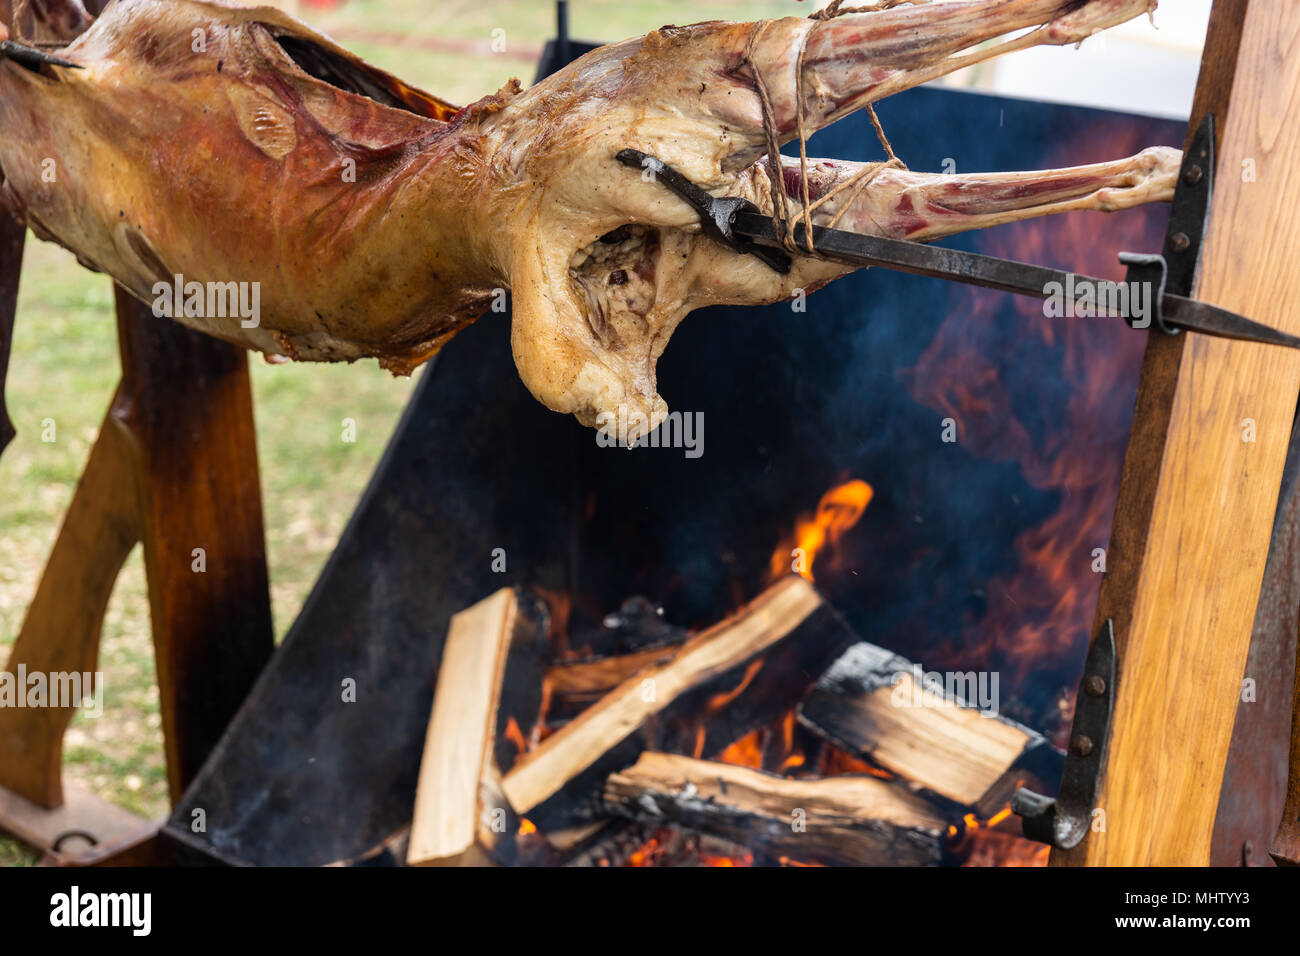 Lamb body spit-roasts over the open fire. Golden brown meat, drops of hot fat. Burning firewood and clouds of smoke. Preparation of food in a medieval Stock Photo